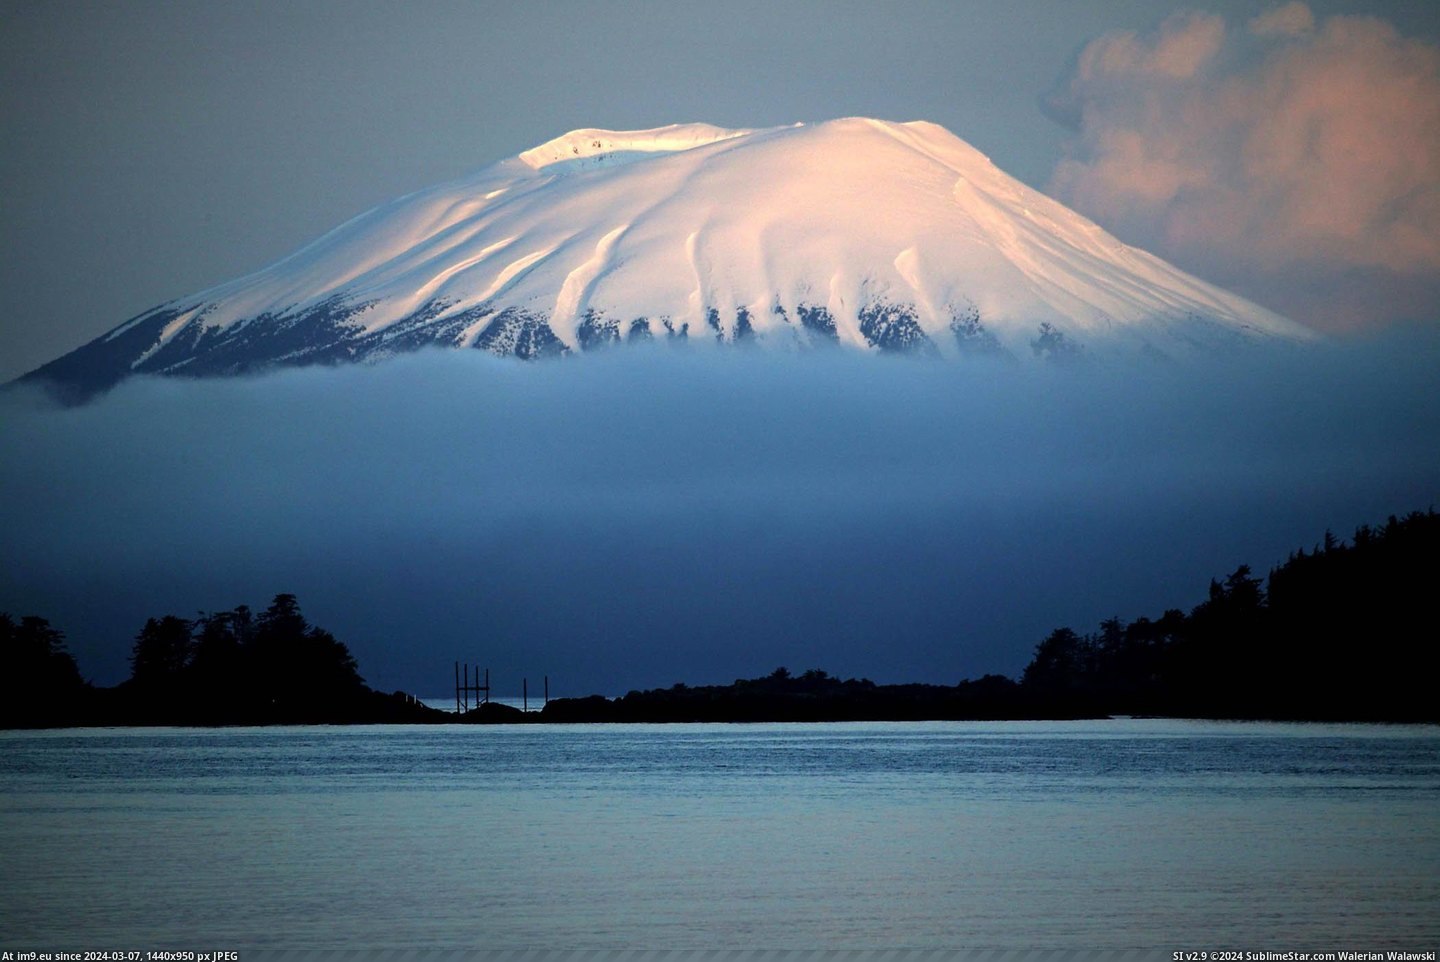 #Out #Mount #Sitka #Edgecumbe #Fog #Rising [Earthporn] Mount Edgecumbe rising out of the fog (Sitka, AK) [2100x1397] Pic. (Image of album My r/EARTHPORN favs))